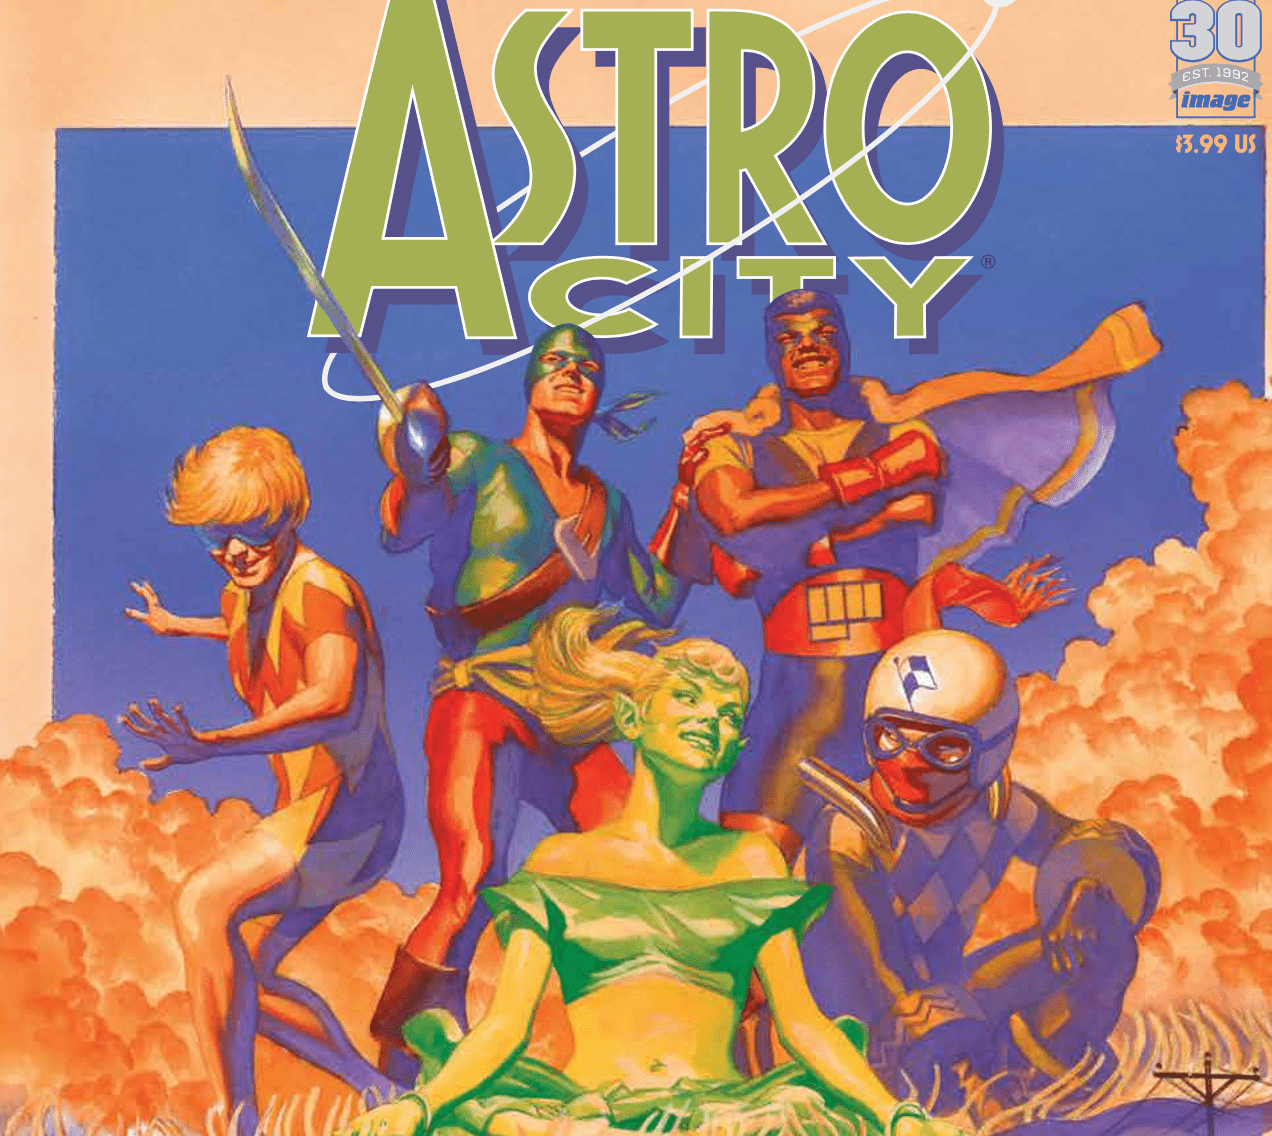 'Astro City: That Was Then… Special' will make you reflect on life